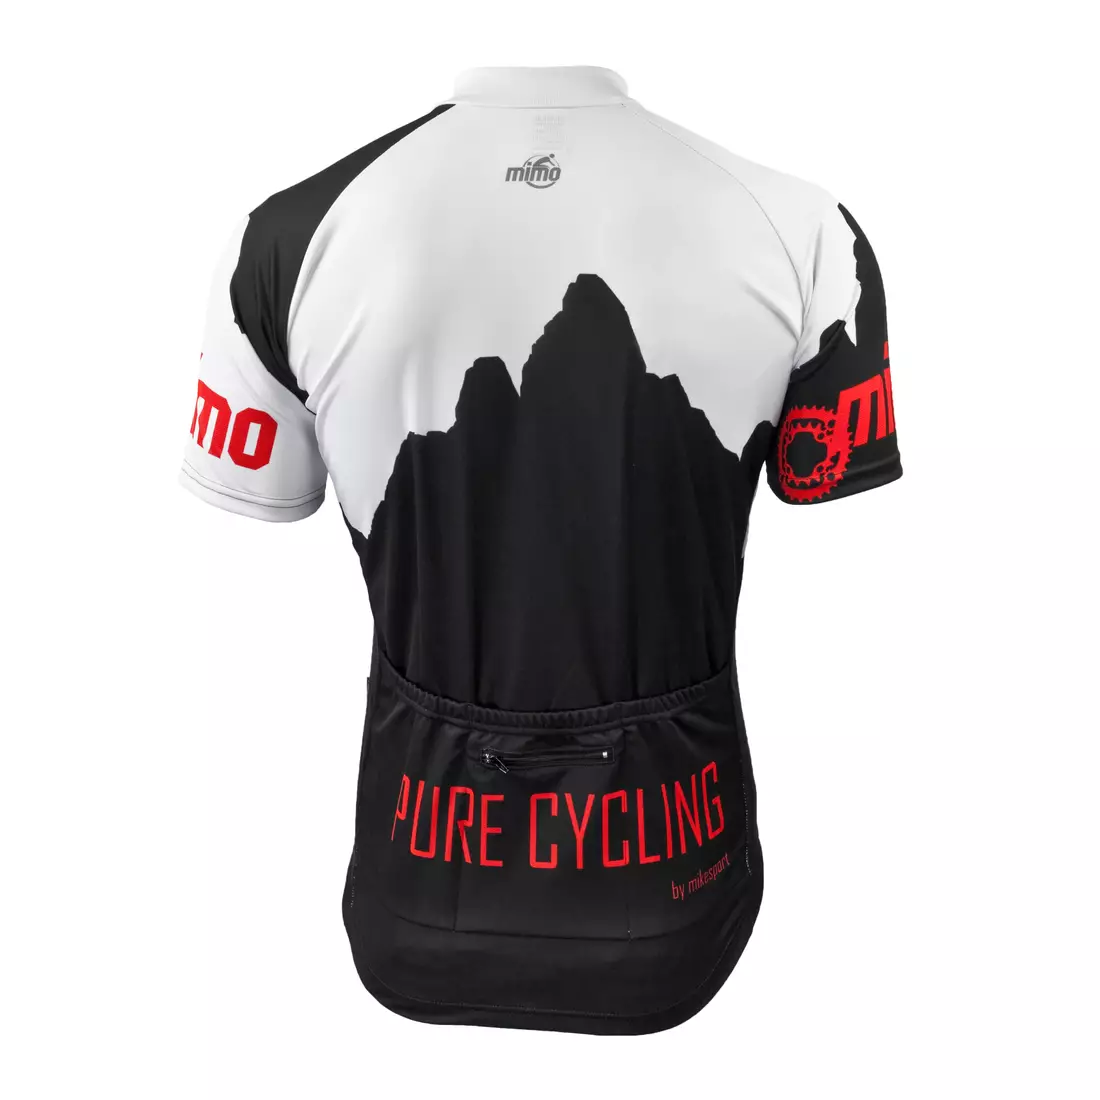 MikeSPORT DESIGN PURE cycling jersey, black